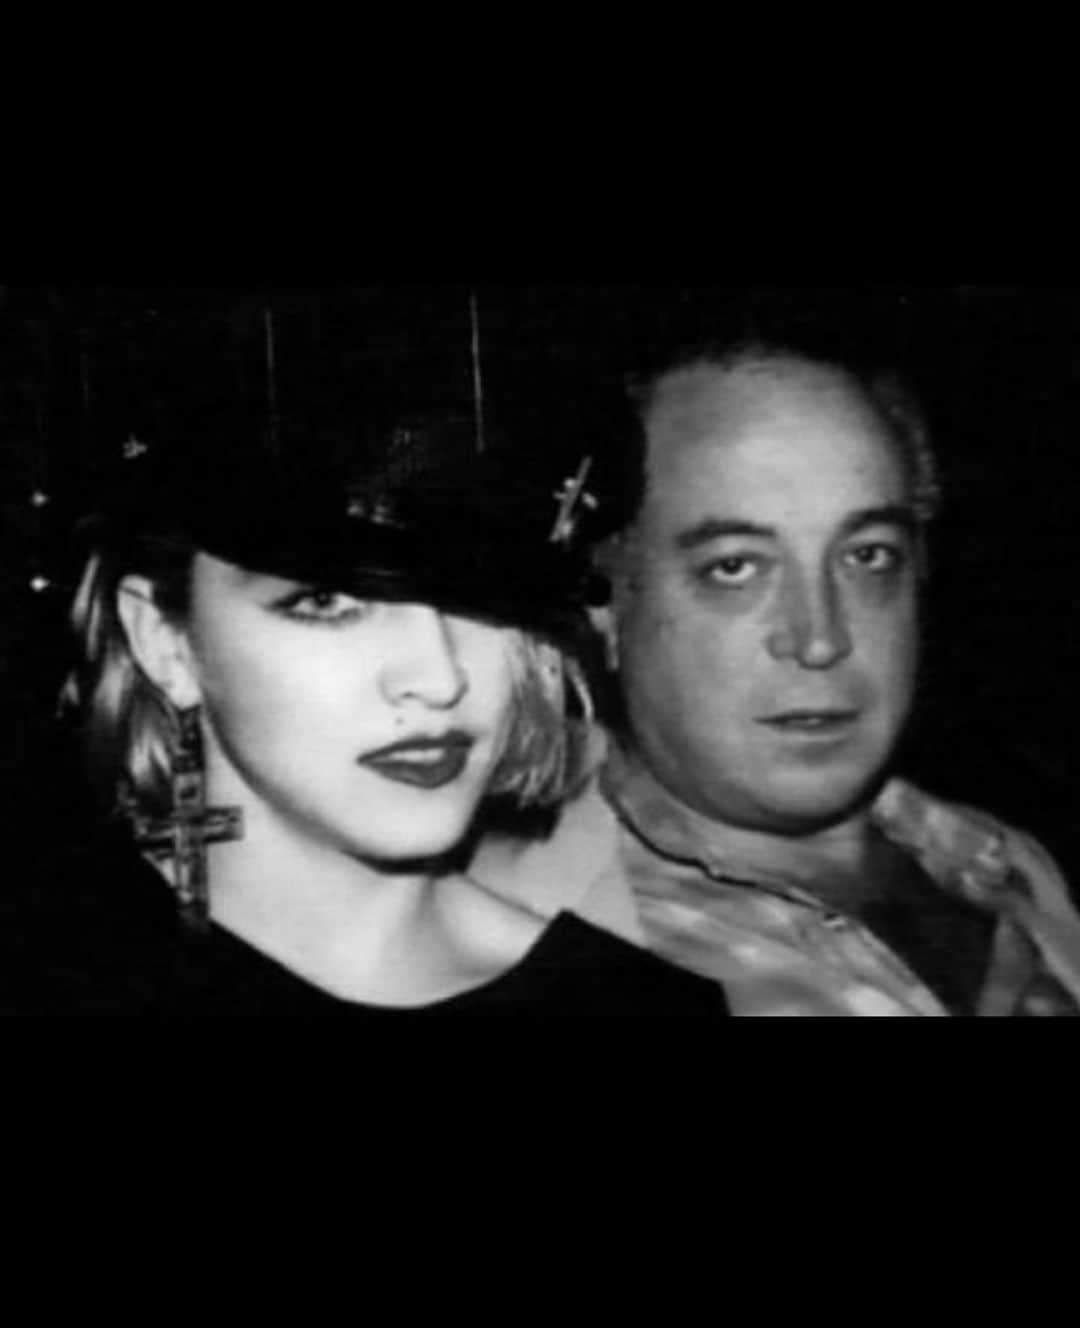 マドンナのインスタグラム：「Seymour Stein Has Left Us! I need to catch my breath.  He  Was  one of the most influential Men in my Life!! He changed and Shaped my world. I must Explain.   I stalked a DJ  named Mark Kamin- for a year at a club called Danceteria! In the Early 80’s.  He finally agreed to play my demo of a song called “Everybody” on a Saturday night.  The Club was packed. An A&R man from SIRE records was there—Michael Rosenblatt.  He heard the music and asked me if he could bring me to meet his boss Seymour Stein.  I Couldn’t get the words “Hell  Yes”! out of my mouth fast enough!   Unfortunately Seymour was in the hospital for a  Heart Ailment!  I didn’t care.  Lets Goooooo!  When I met him he was laying in a hospital bed wearing his boxer shorts and a wife beater!  He had a cannula up his nose and a saline Drip in his arm!  He was grinning like the Cheshire Cat.  I was carrying my giant boombox ready to play My cassette for him immediately!  He smiled and laughed when he saw me and asked me if I was related to  the Virgin Mary!! Hahahhahahaa. I knew we would hit it off.  I played  him the song a few times.  He signed me to his record label that day!!  This moment changed the course of my Life  Forever. And was the beginning of my journey as a Musical Artist.  Not only did Seymour hear me but he Saw me and my Potential!  For this I will  be eternally grateful!  I am weeping as I write this down.  Words cannot describe how I felt at this moment after years of grinding and being broke and getting every door slammed in my face.   Anyone who knew Seymour knew about his passion for music and his impeccable taste.  He had an Ear  like no other!  He was  Intense -Wickedly Funny-a little bit Crazy And Deeply intuitive.  Dearest Seymour you will never be forgotten!! Thank You! Thank you Thank you! 🙏🏼 💙. . Shine on!!!」